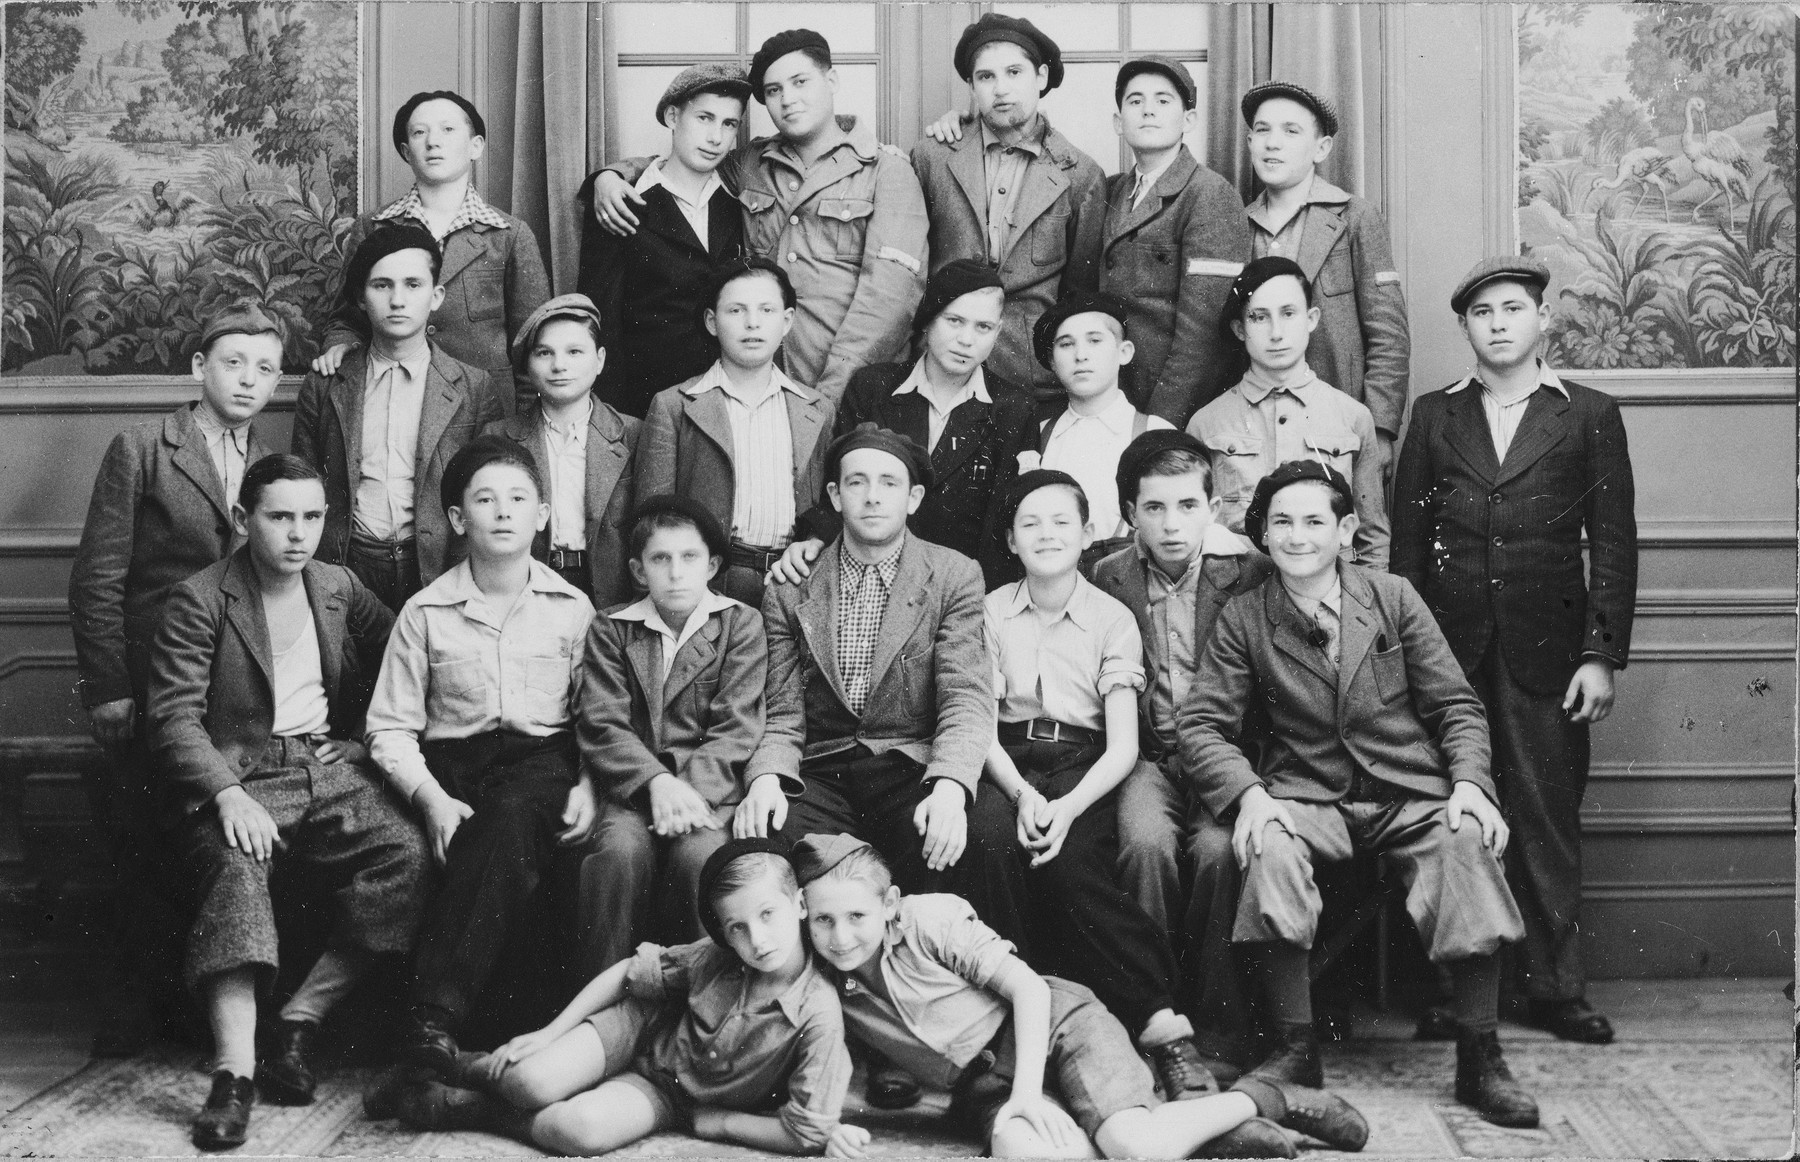 Group portrait of Jewish DP youth who numbered among the Buchenwald children, at an OSE (Oeuvre de Secours aux Enfants) children's home in France [either in Ambloy or Taverny].

The man in the middle is Leo Margolis, a German Jew who was in Buchenwald for approximately six years and helped care for the children.  To his left is Natan Swarc from Piotrkow and on the far right of that row is Josef Szwarcberg.  Lying in front are Izio Rosenman and Jacques (Jakob) Finkelsztajn.